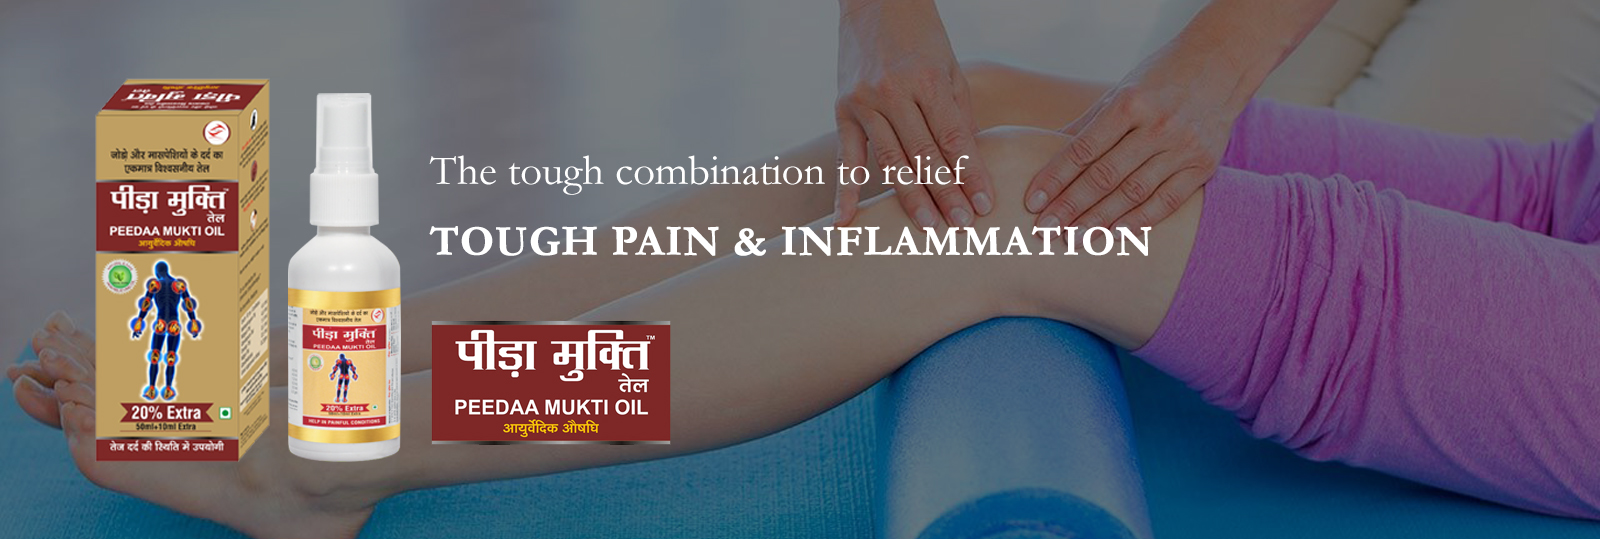 tough pain and inflammation